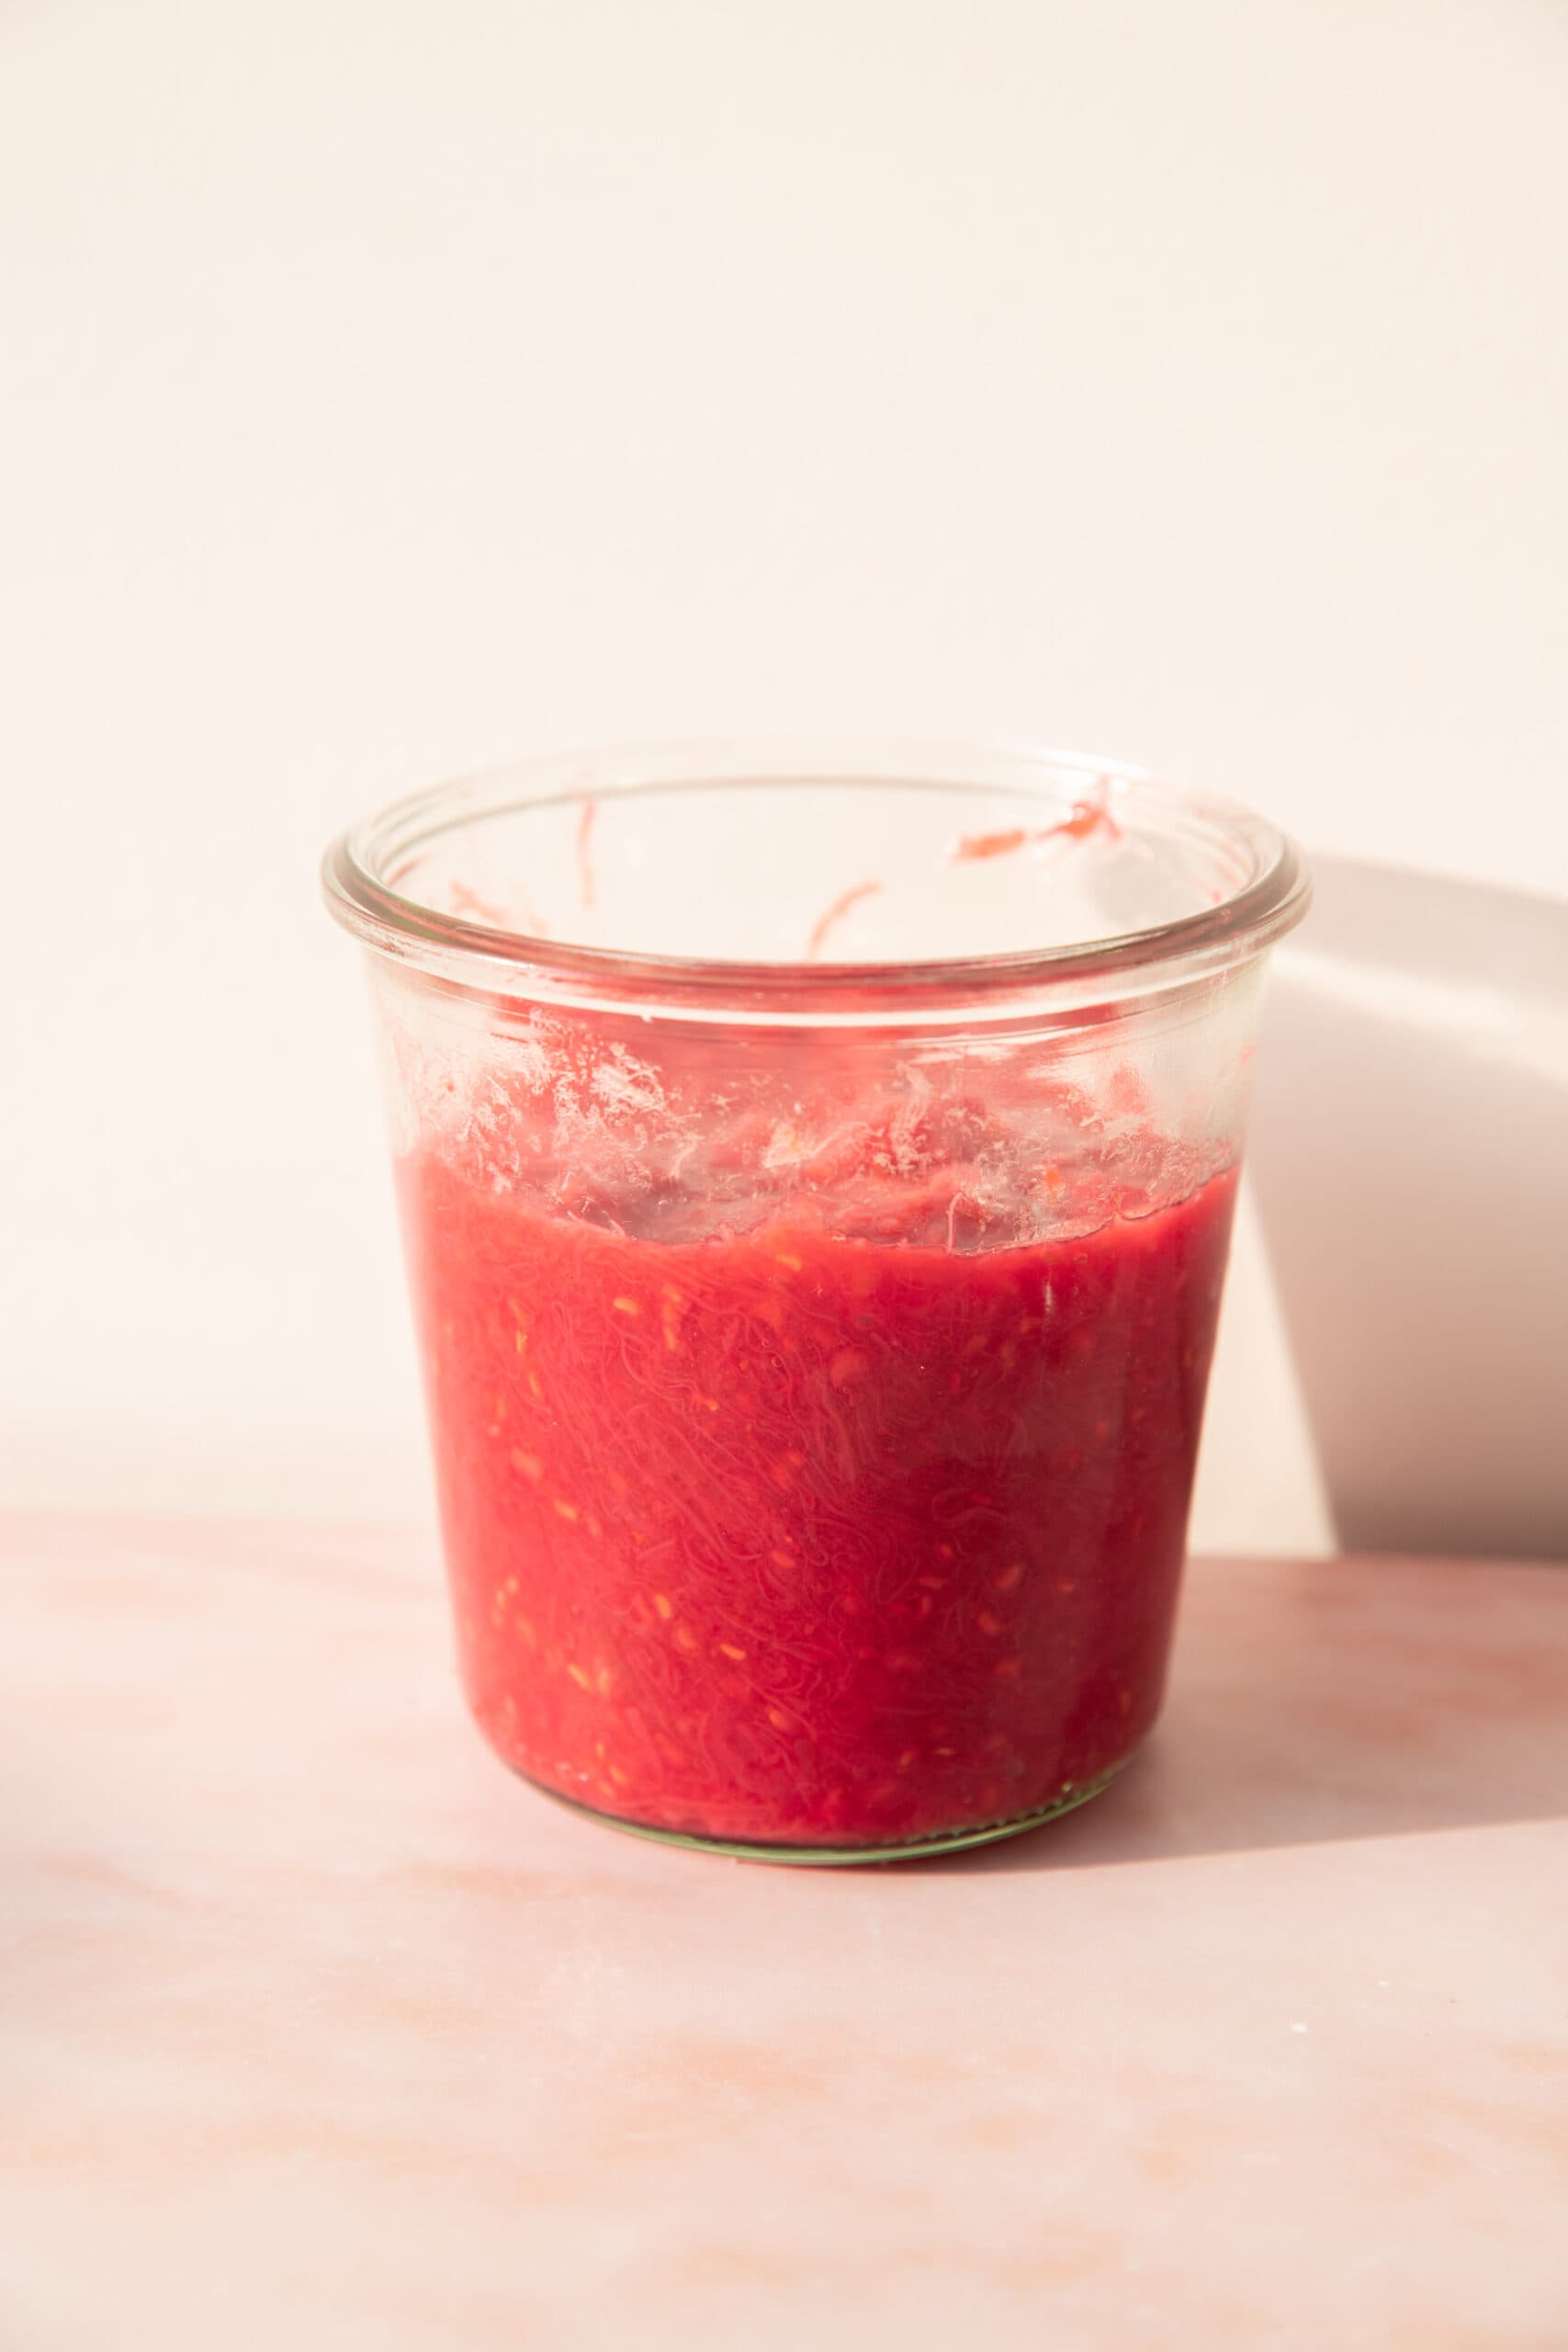 Side view of a glass jar filled with rhubarb compote.